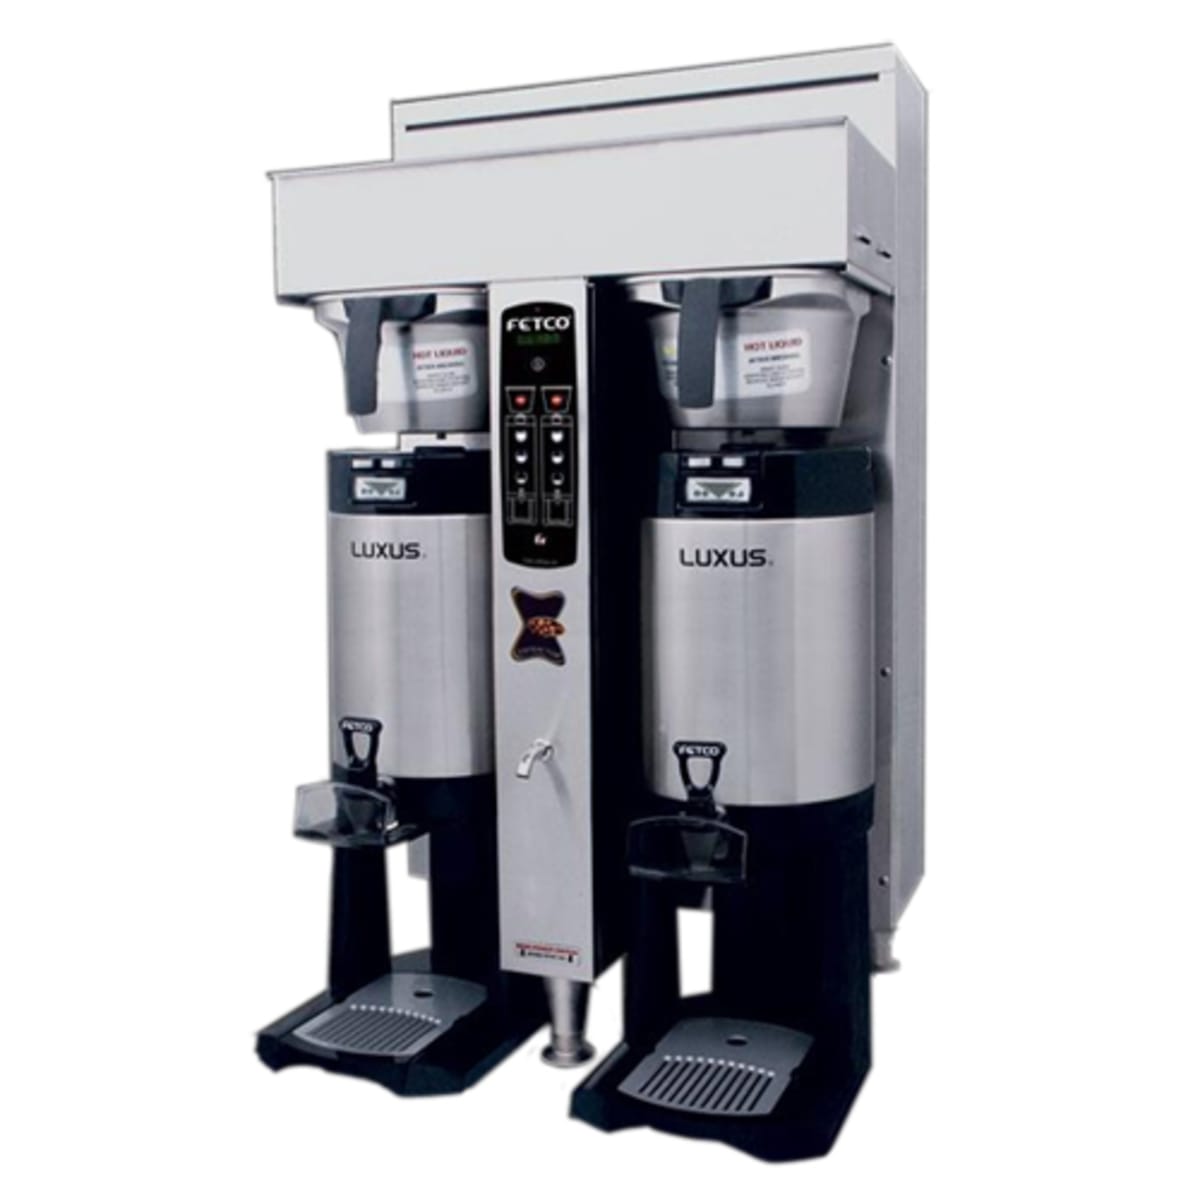 Fetco Dual Thermal Coffee Brewer